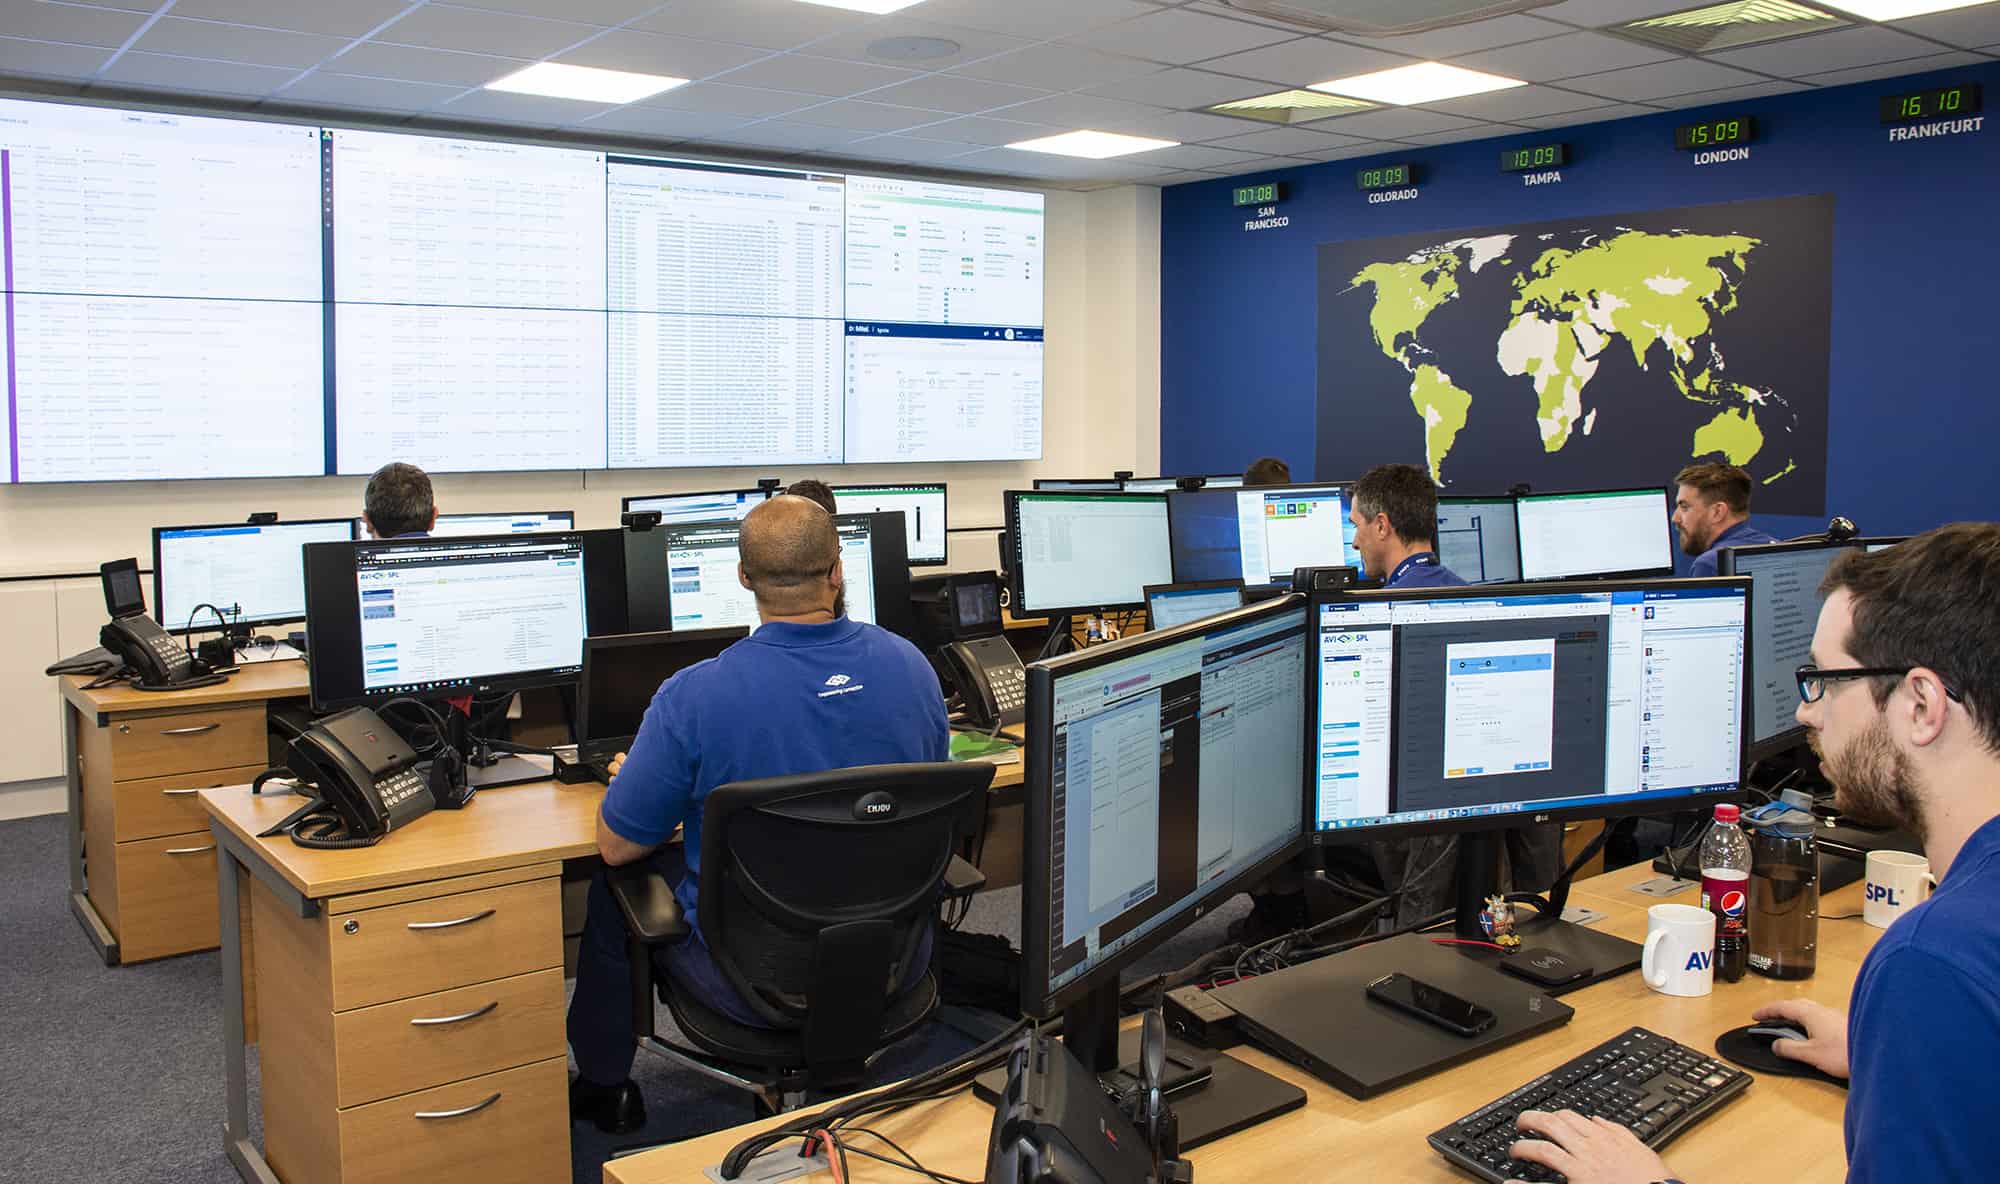 global support staff monitoring global technology deployment